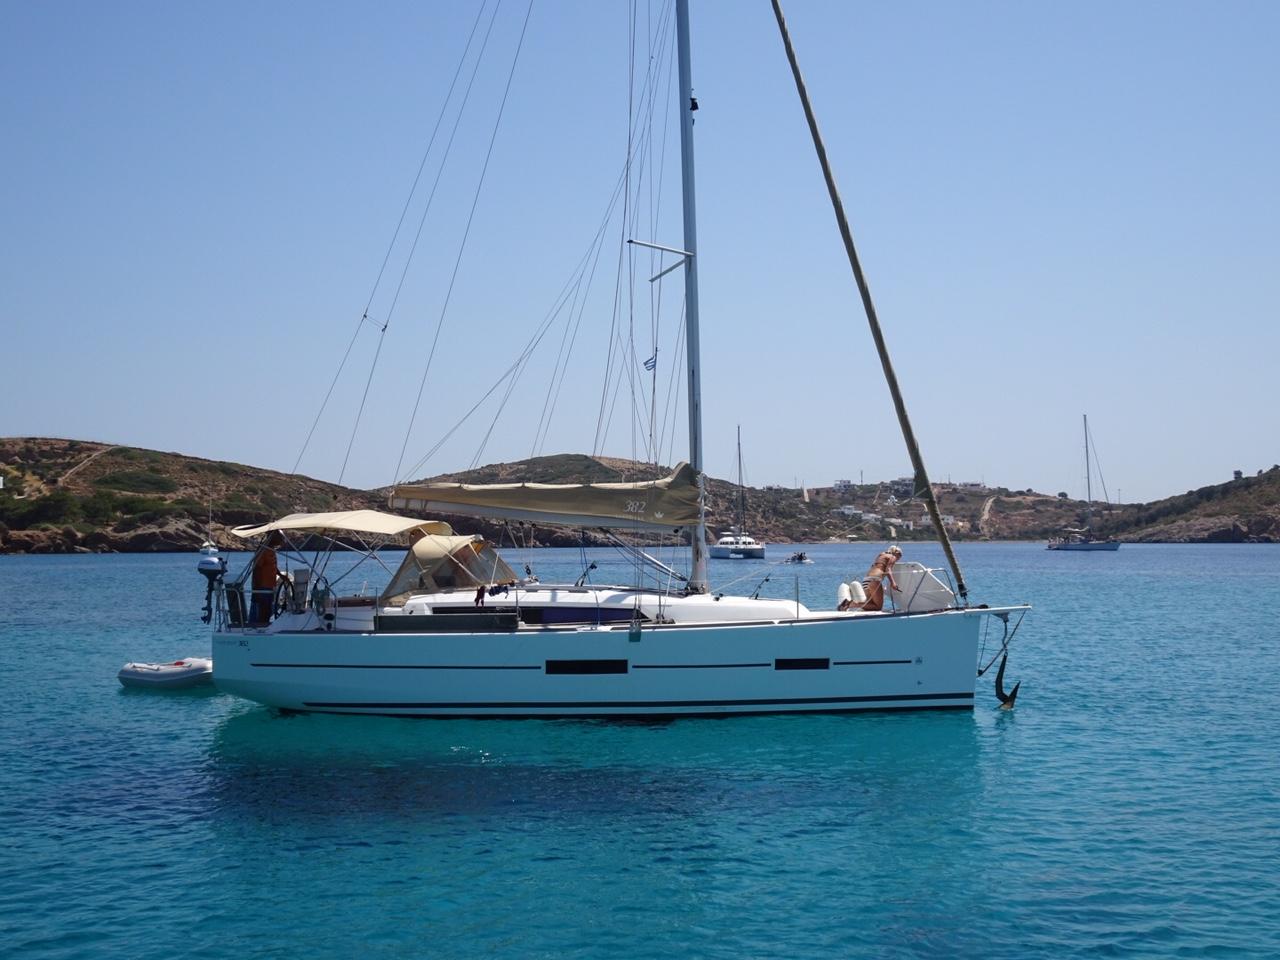 Dufour 382 (sailboat) for sale